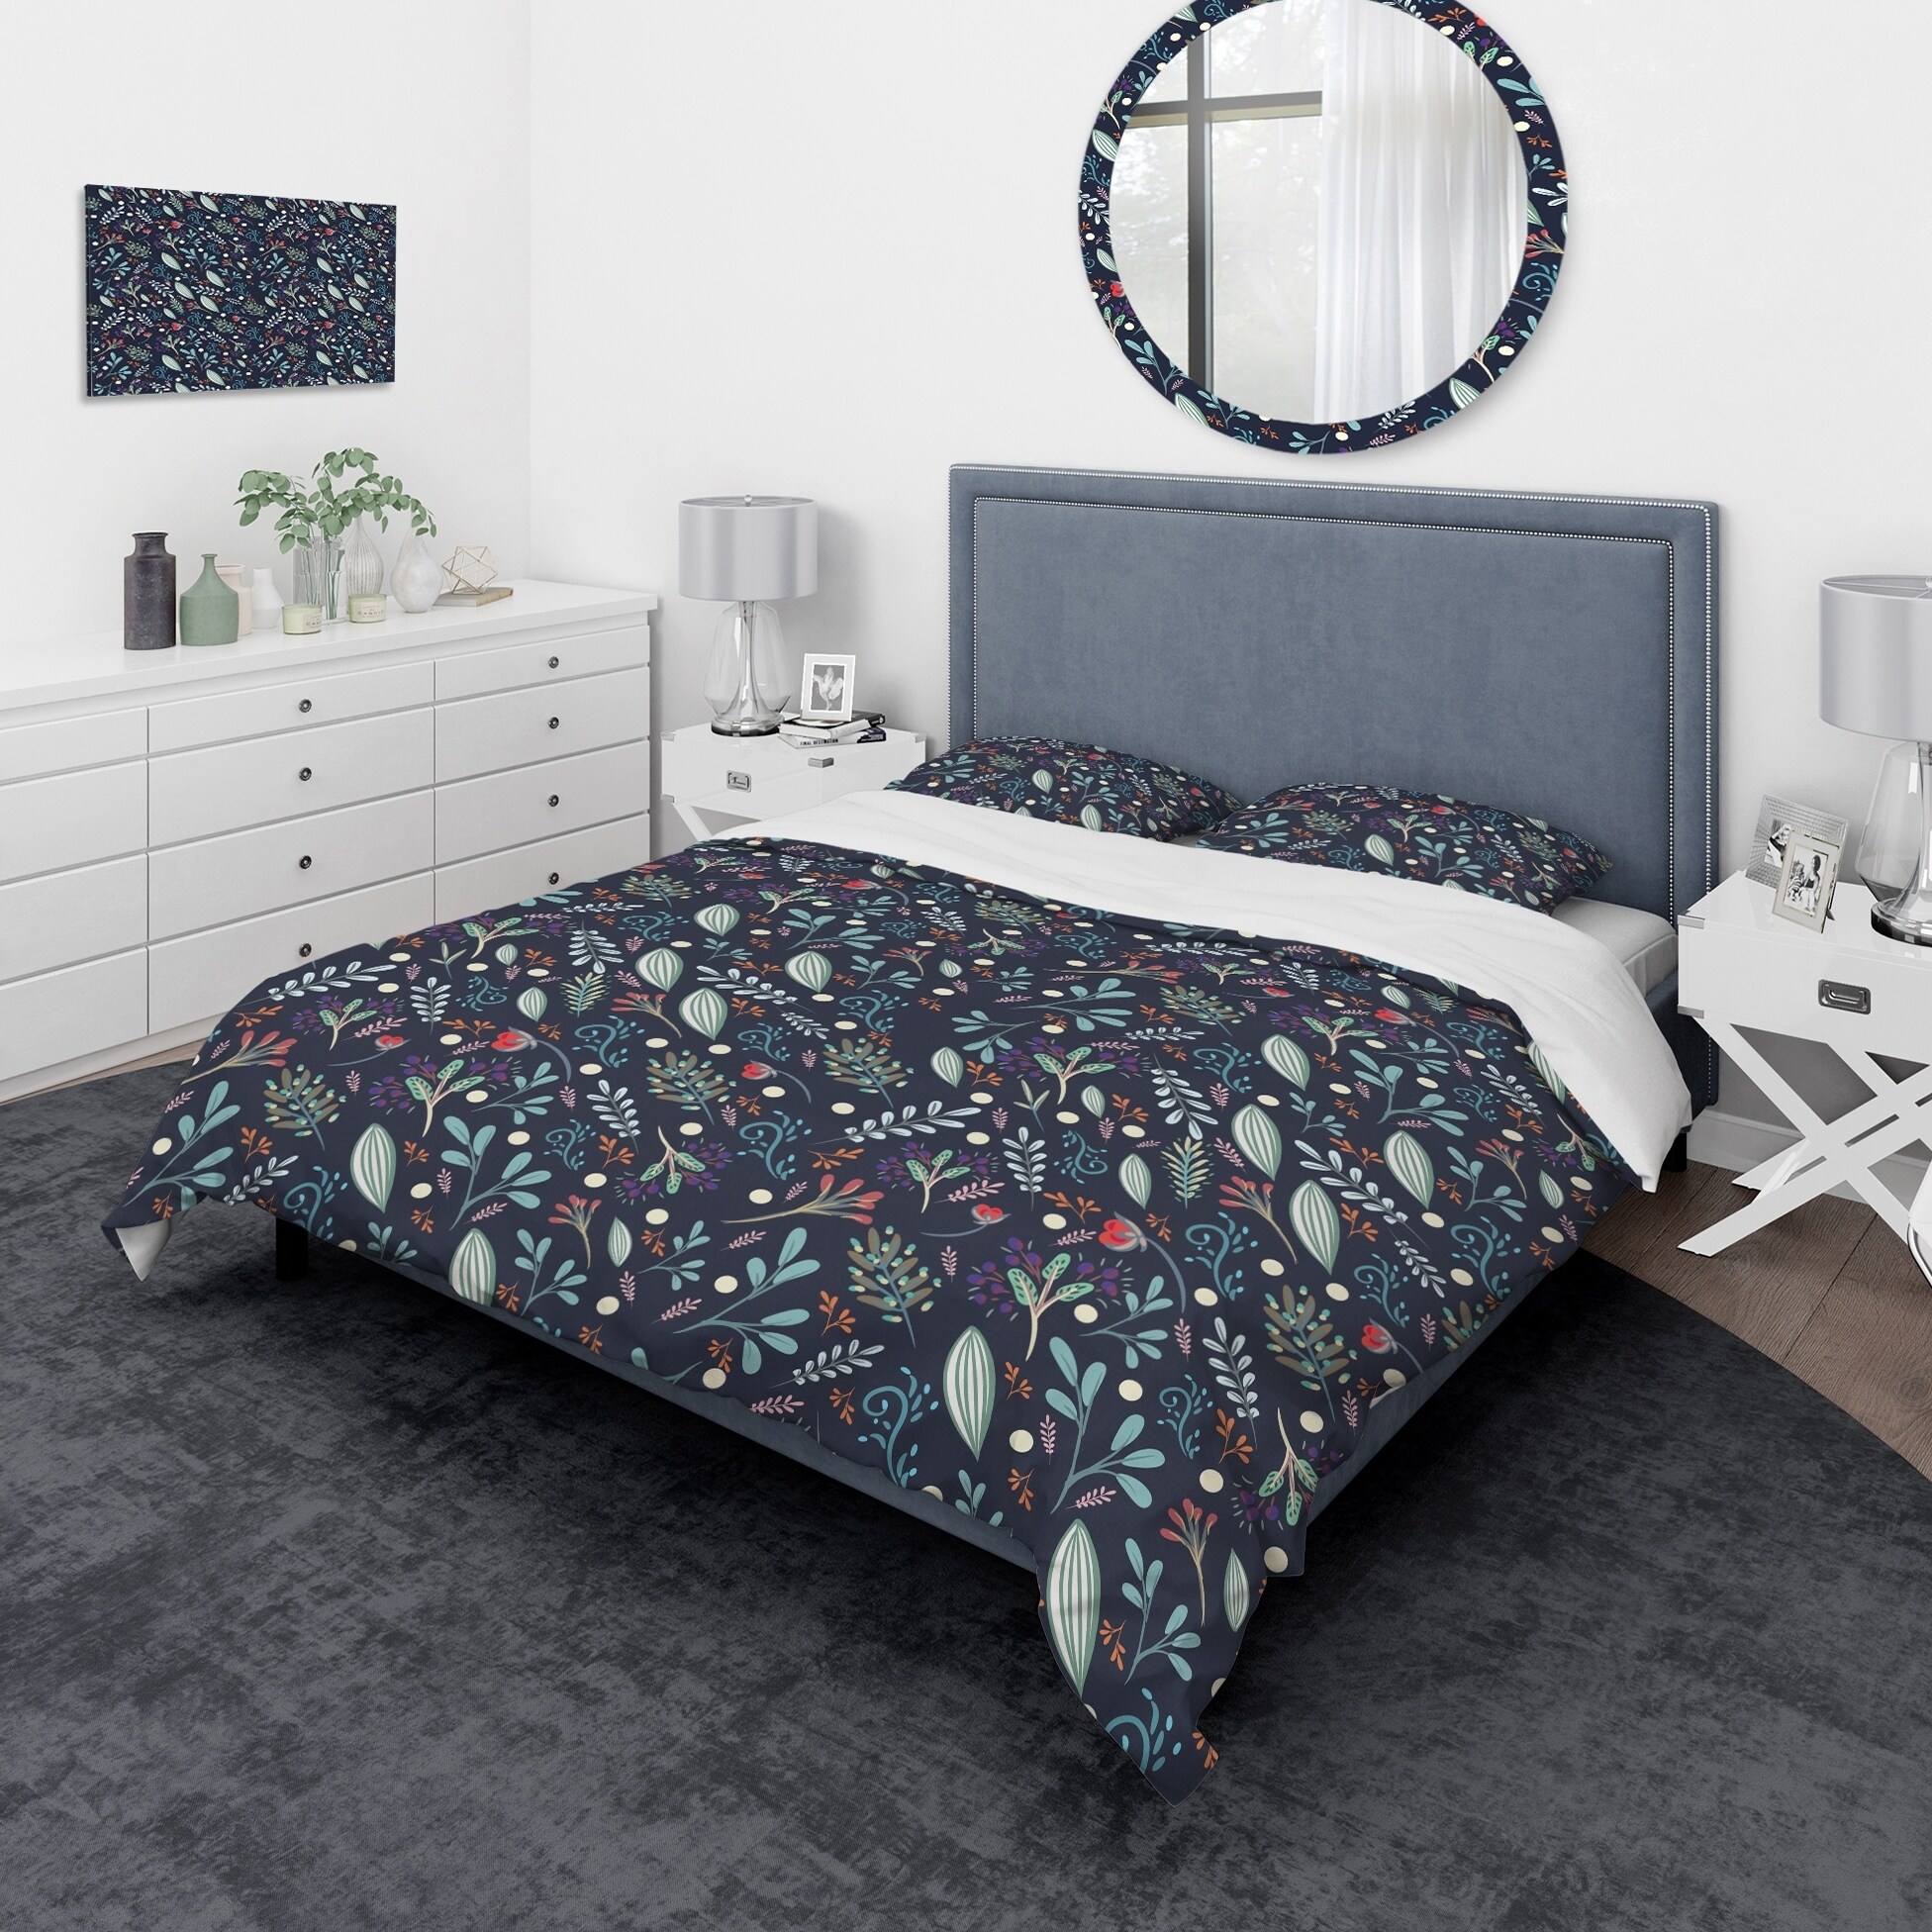 Modern Bed Covers Designs